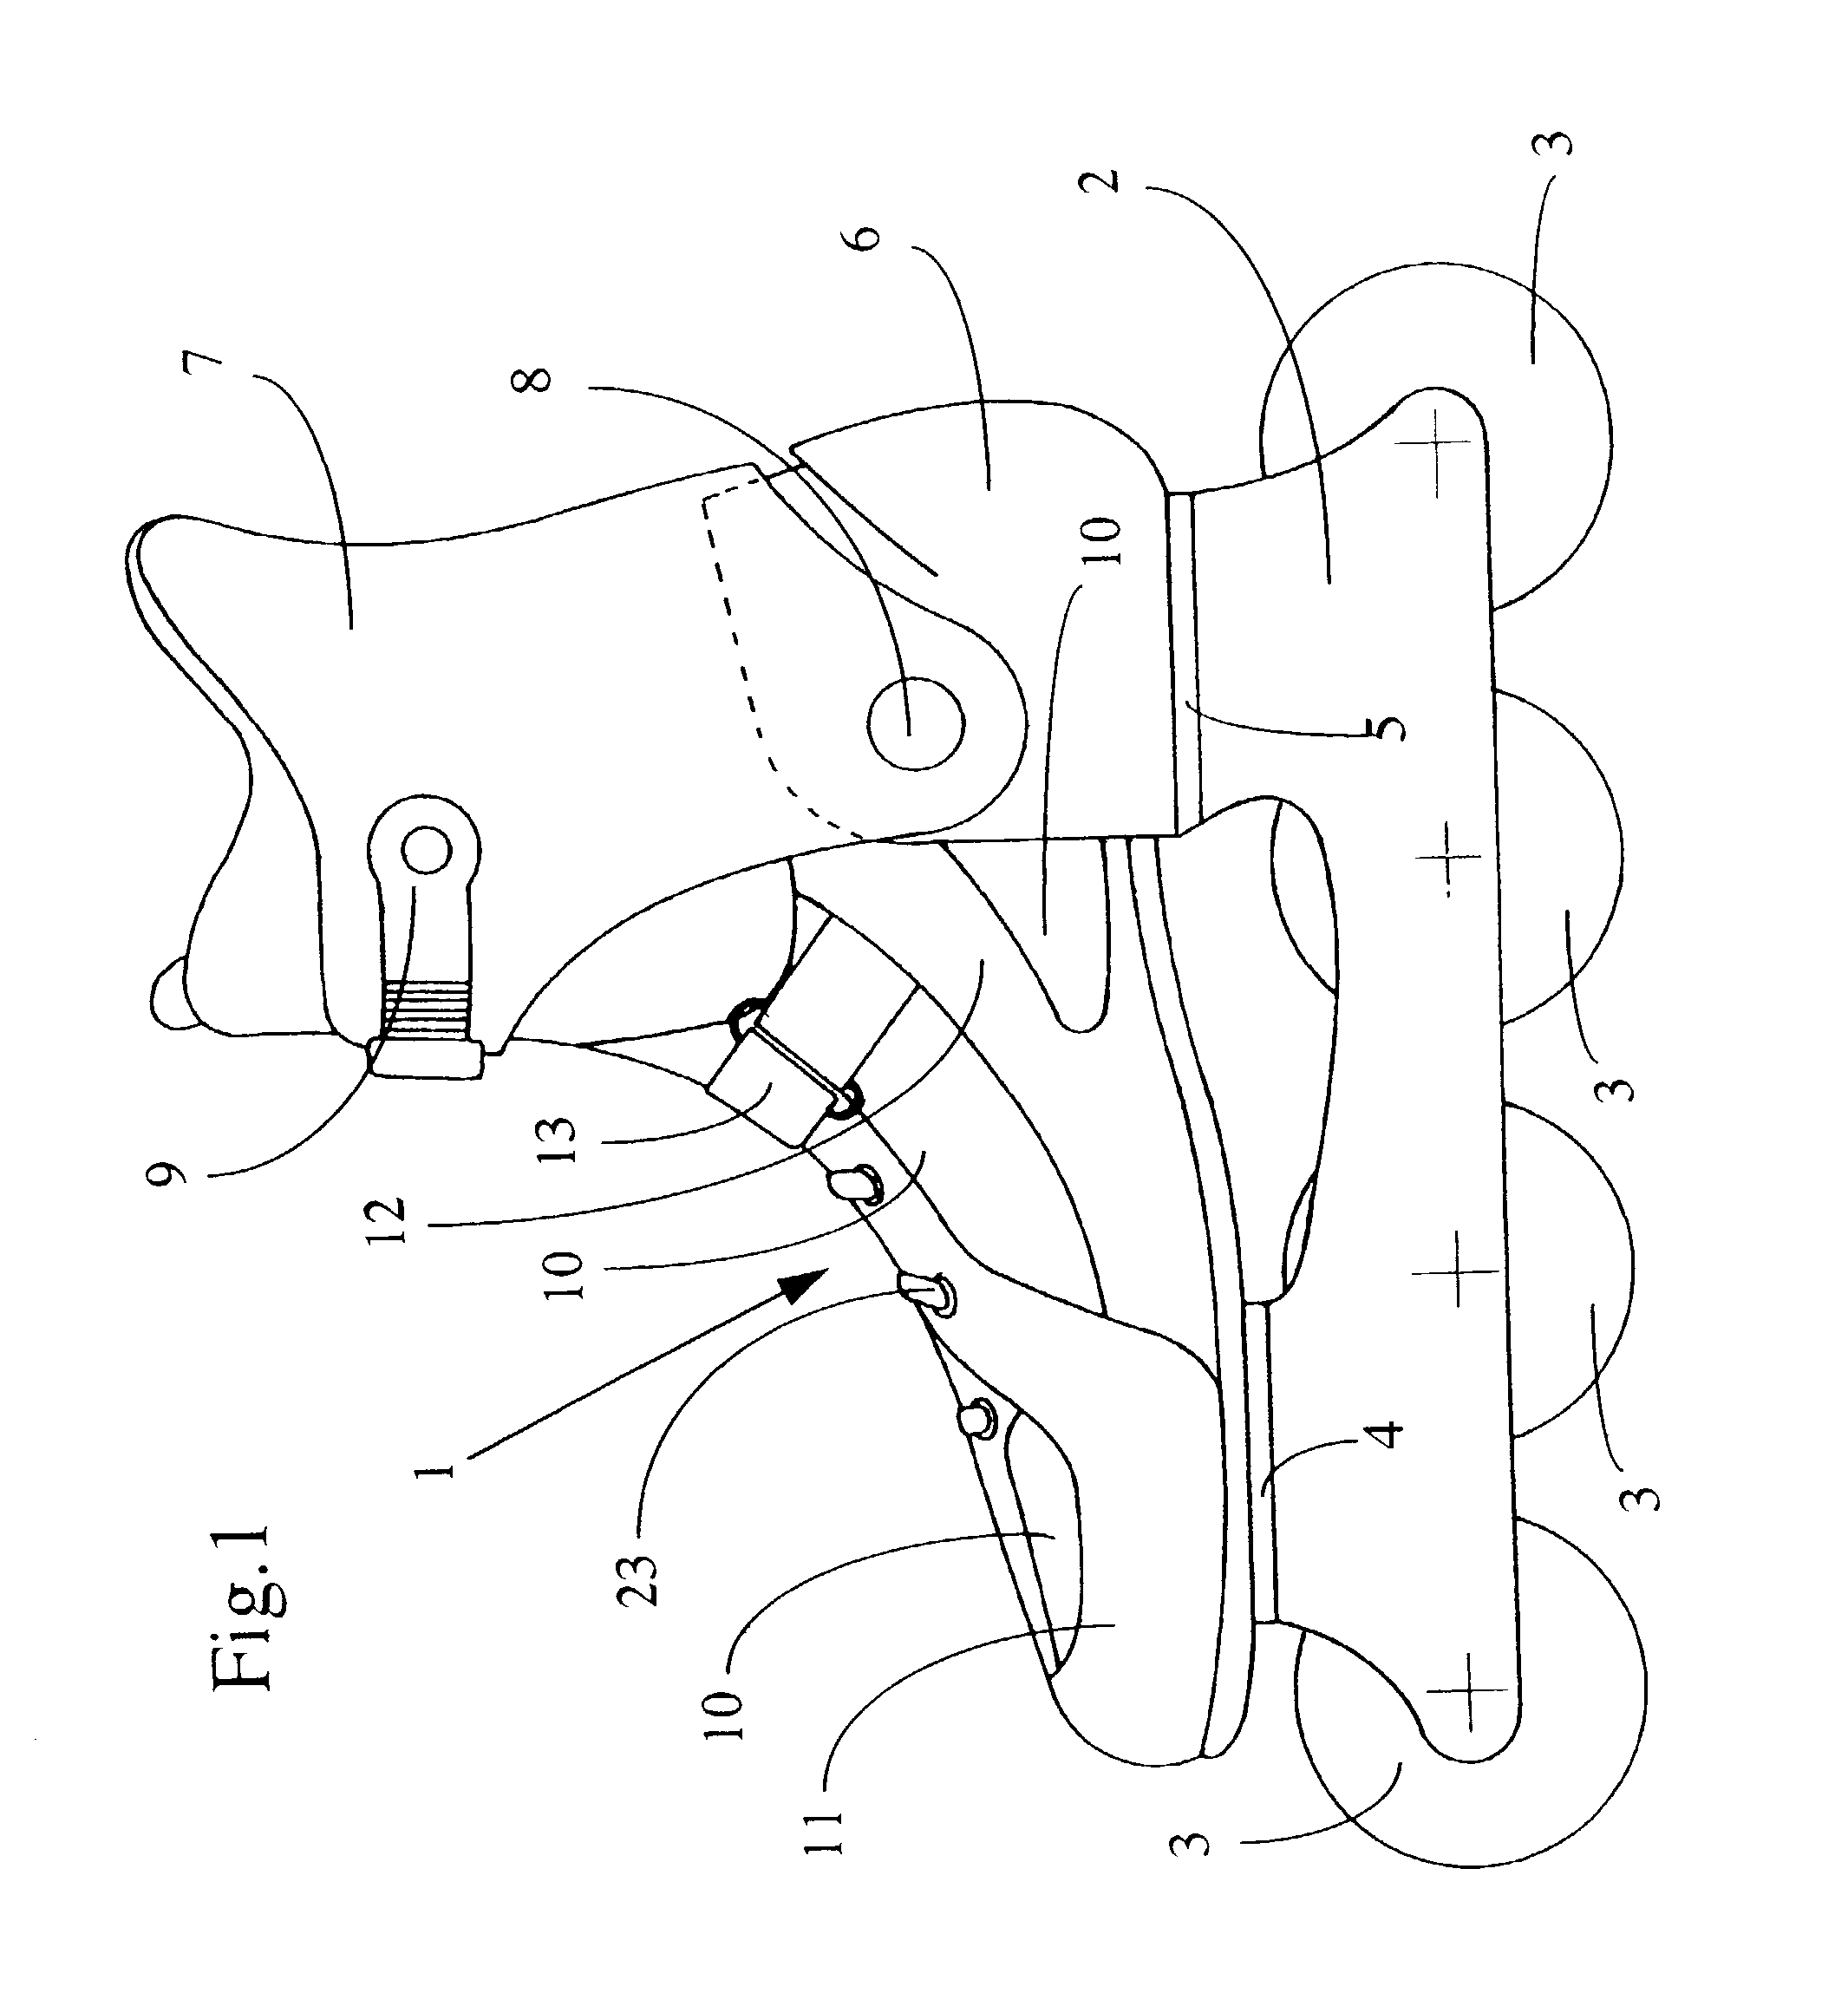 Method of manufacturing in-line roller skate with detachable boot